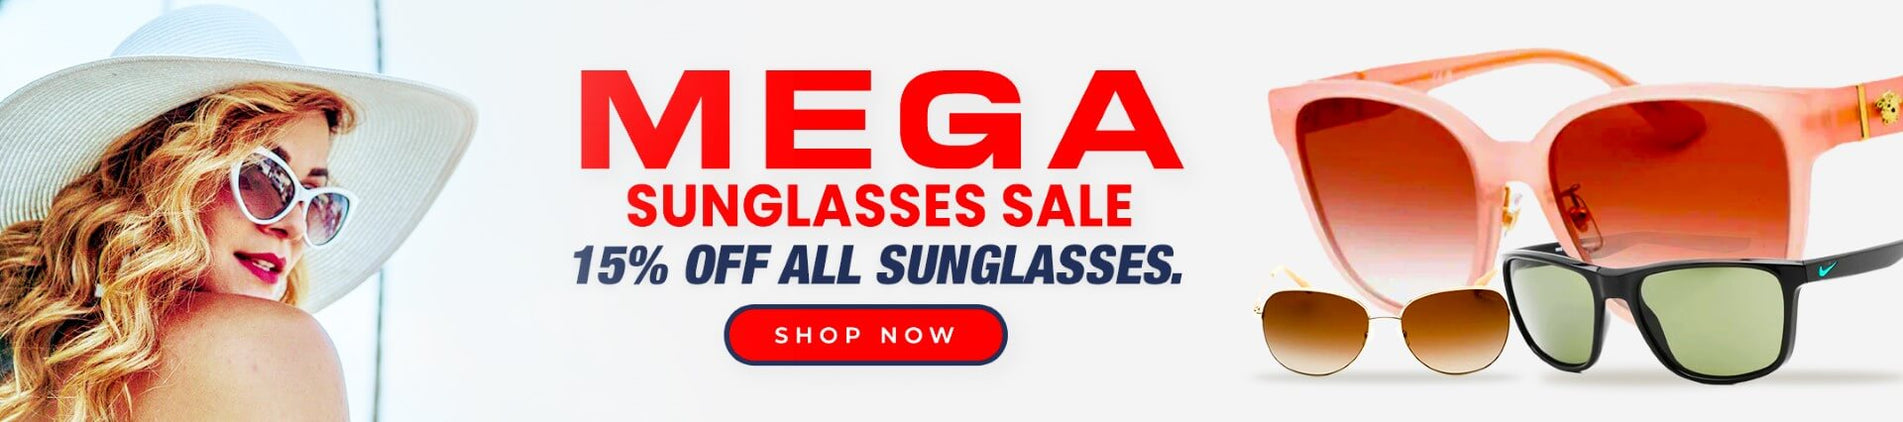 My Gift Stop - 15% Off Sunglasses with code!